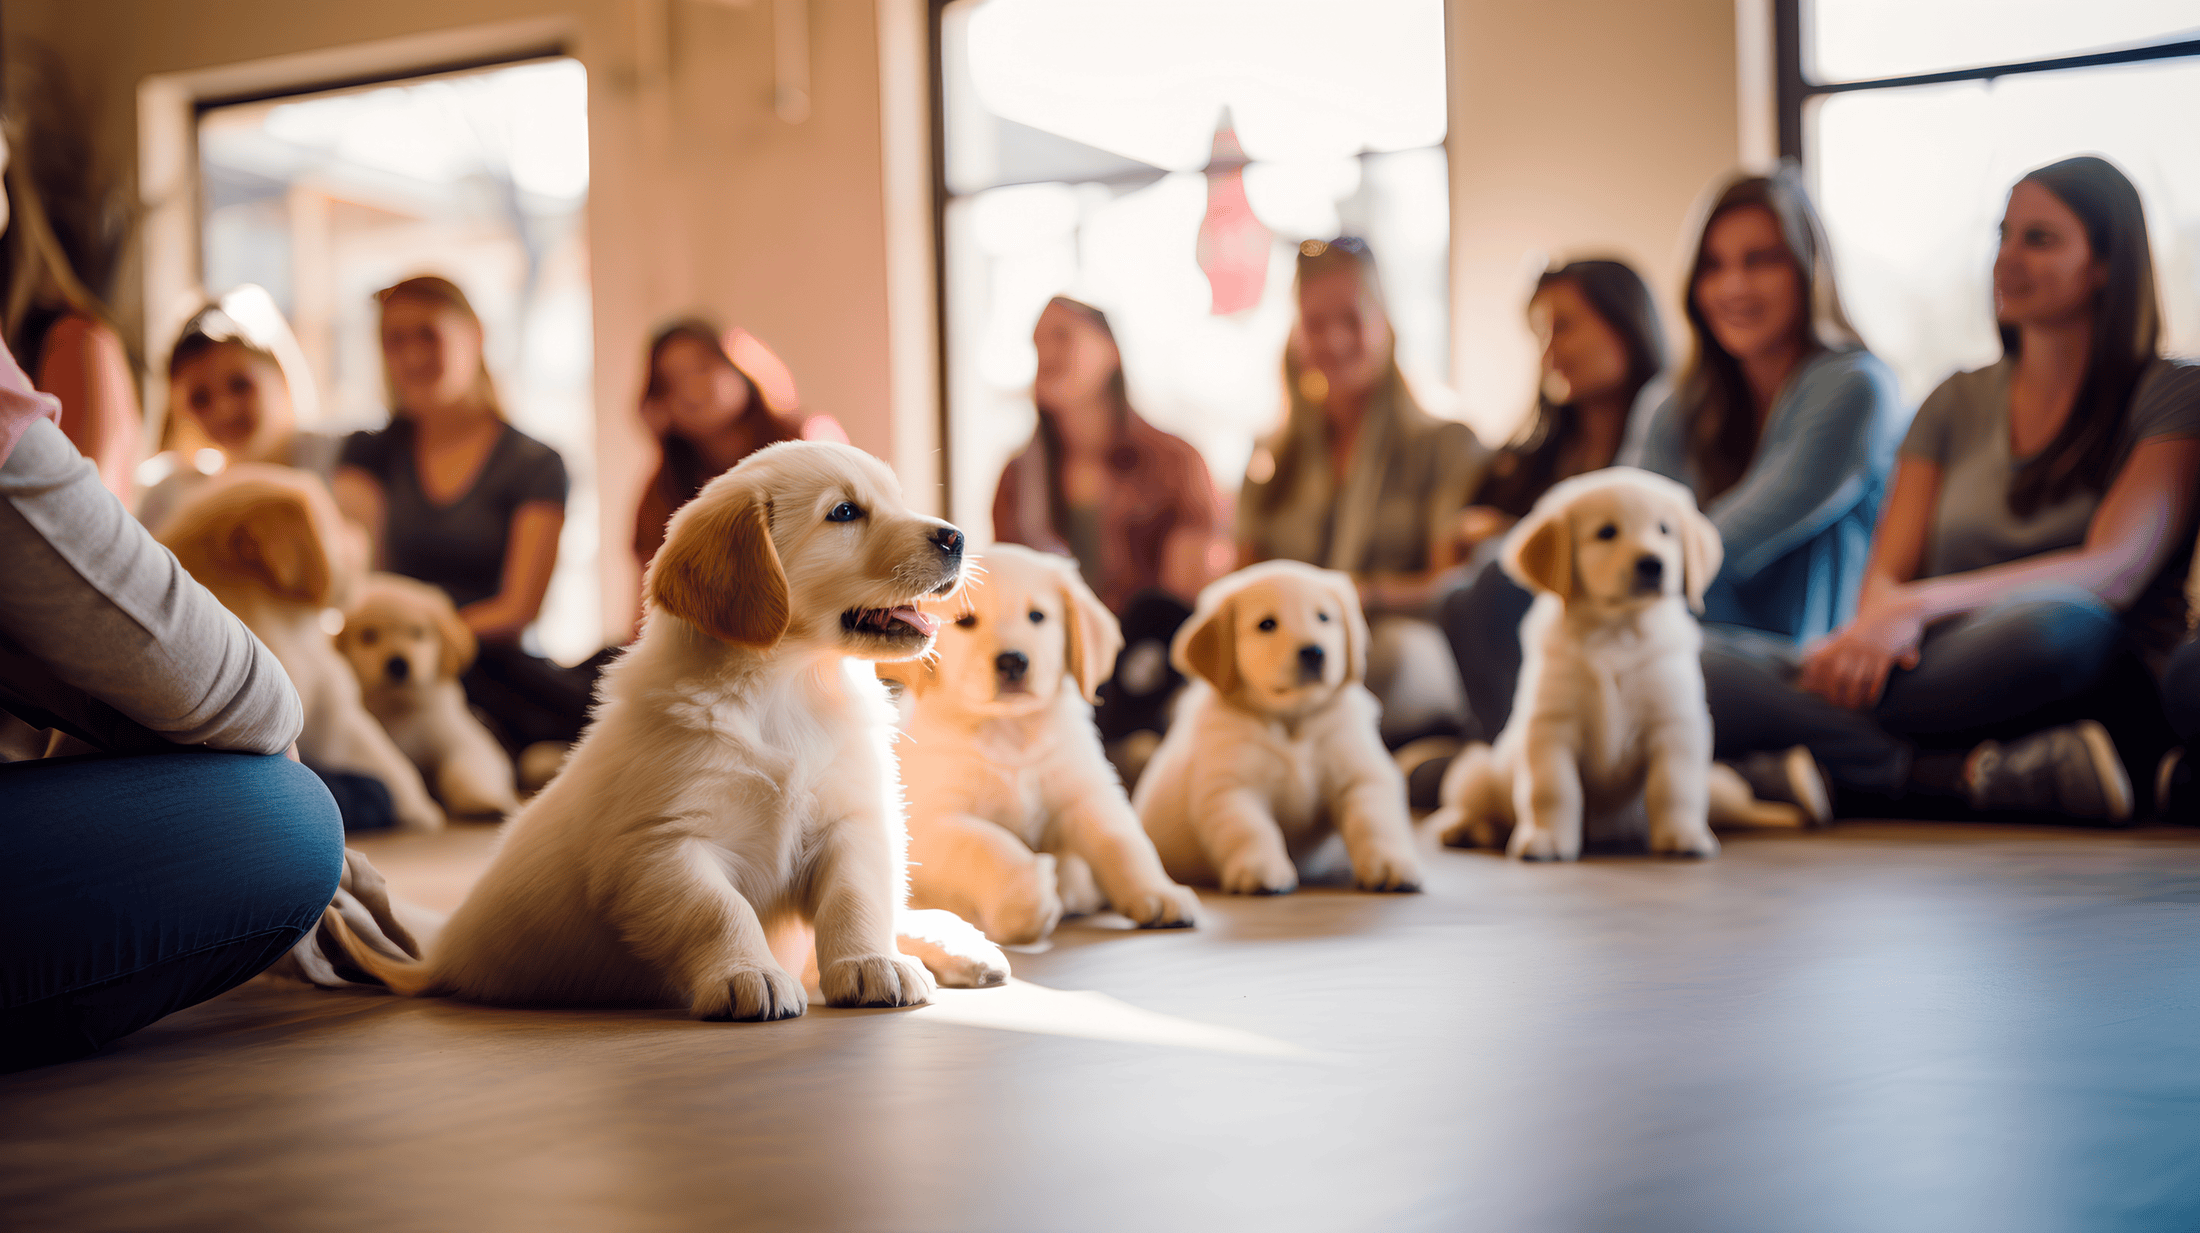 You might enroll your puppy in puppy class. Puppy classes are great for socialization.